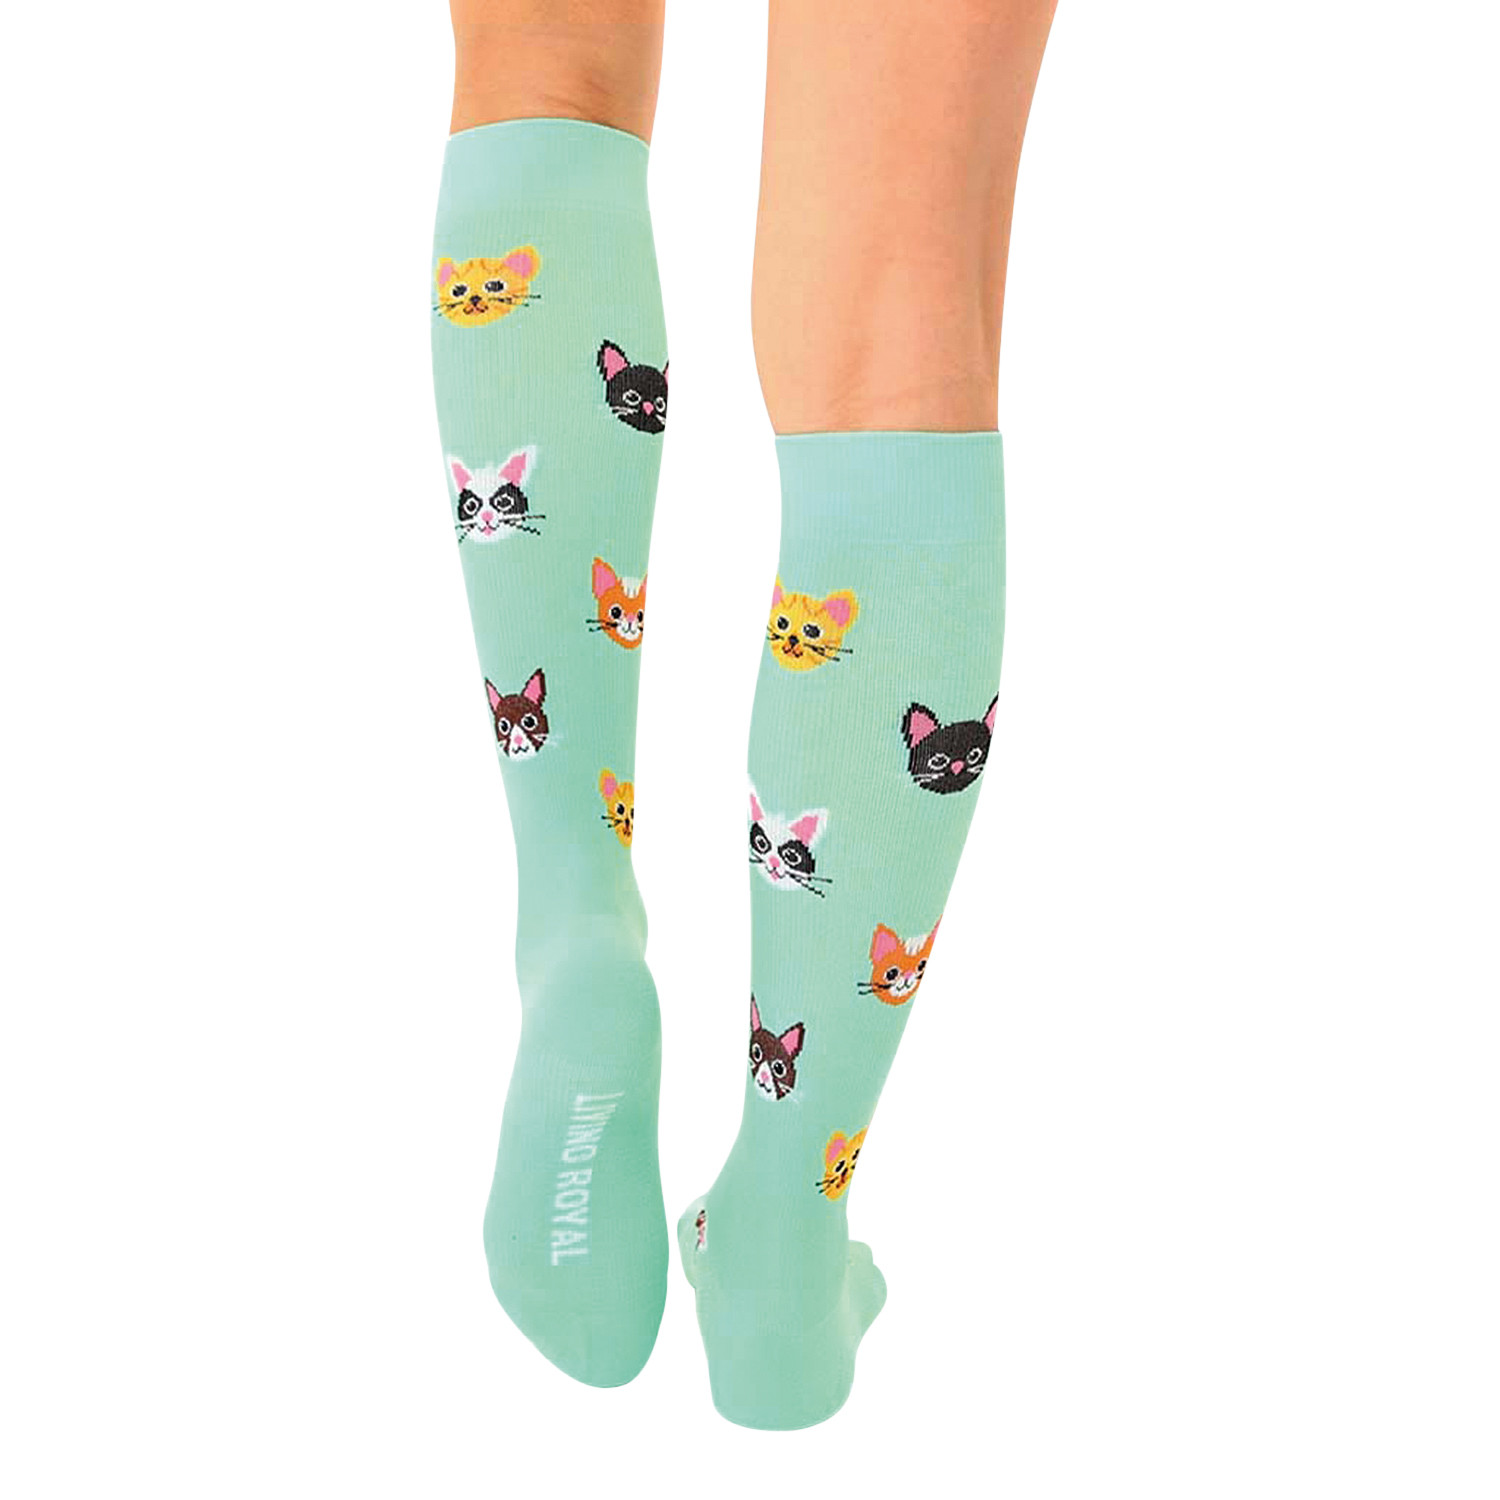 Women's Patterned Moderate Compression Knee High Socks | Support Plus ...